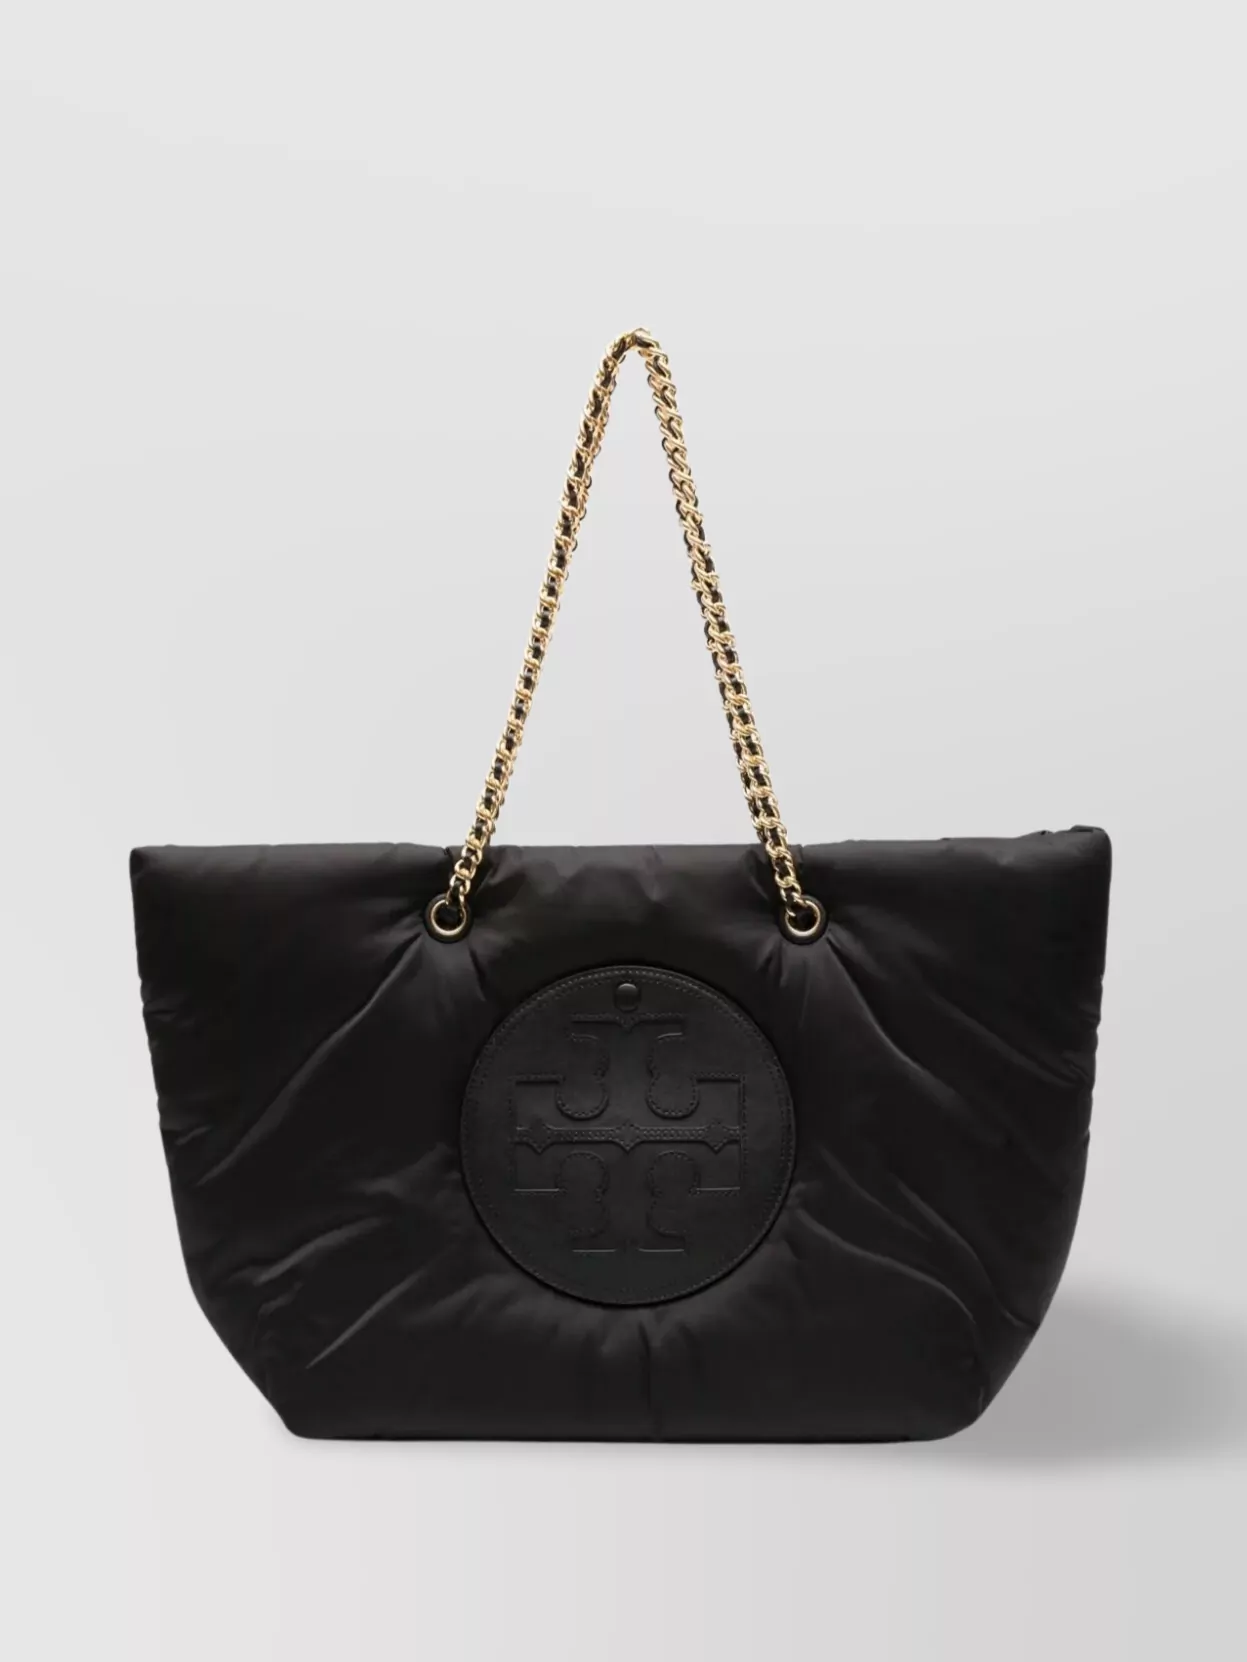 Tory Burch Padded Chain Tote With Hidden Pocket In Black